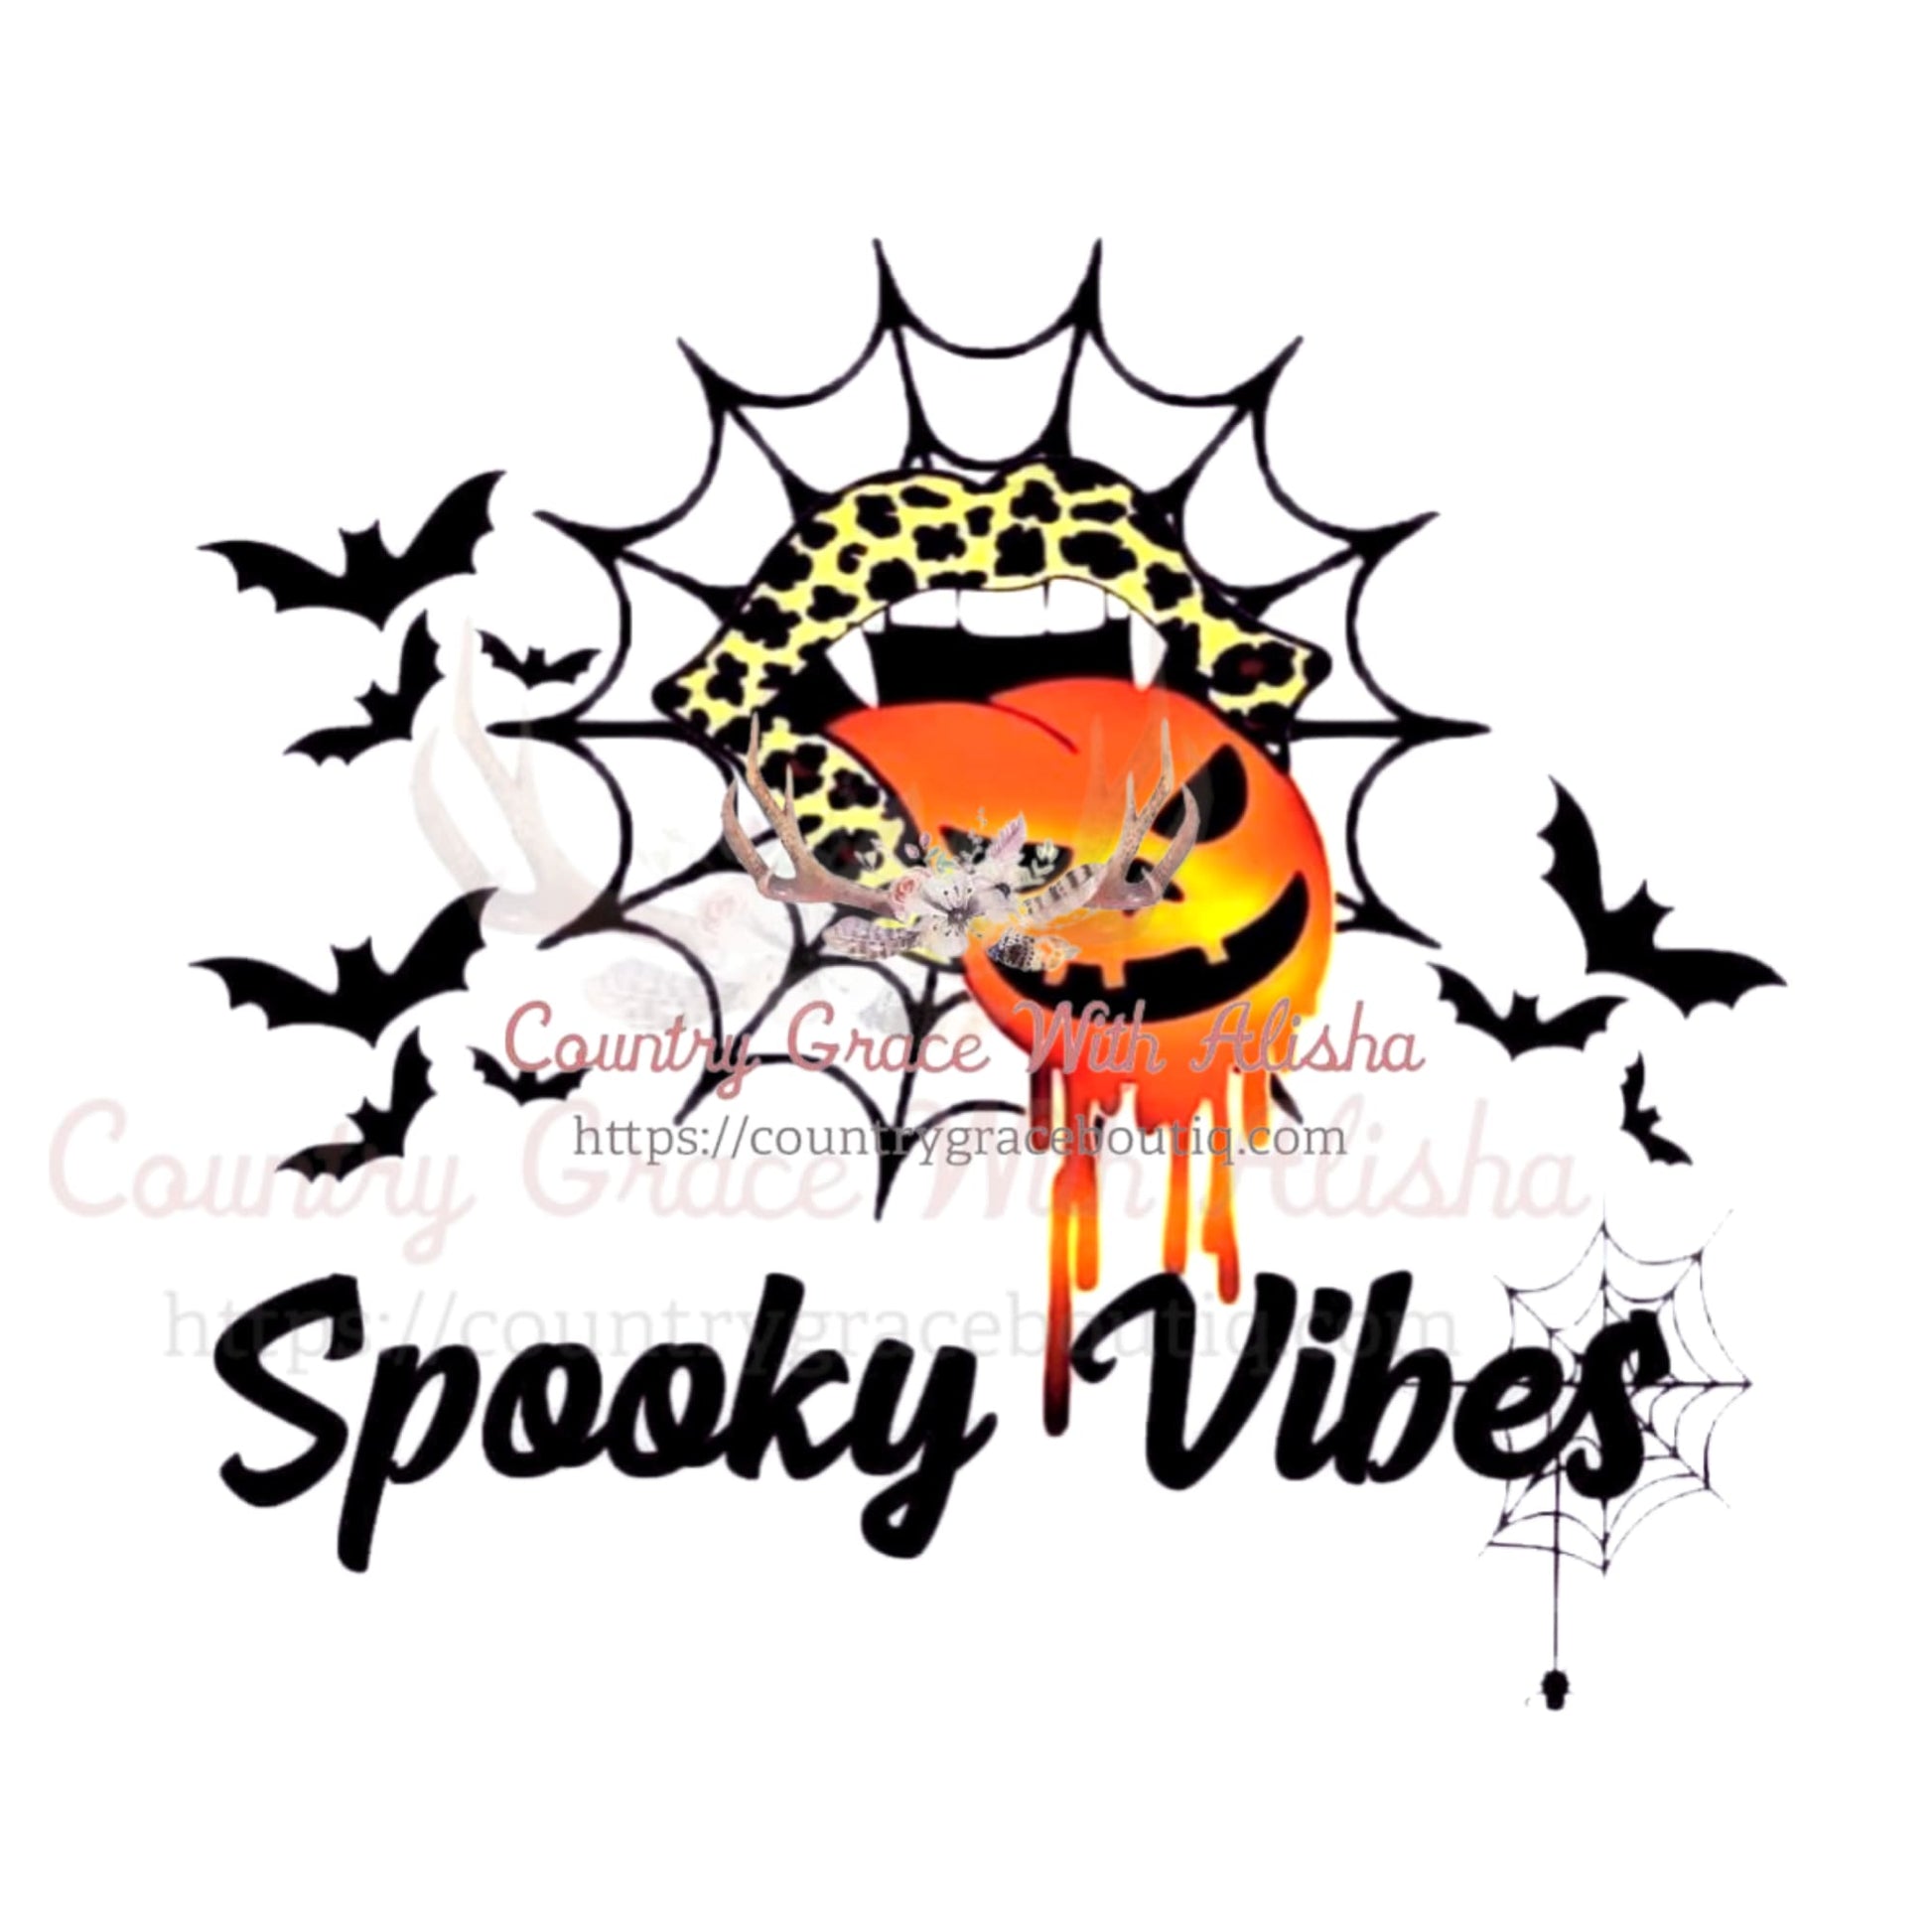 Spooky Vibes Sublimation Transfer - Sub $1.50 Country Grace 